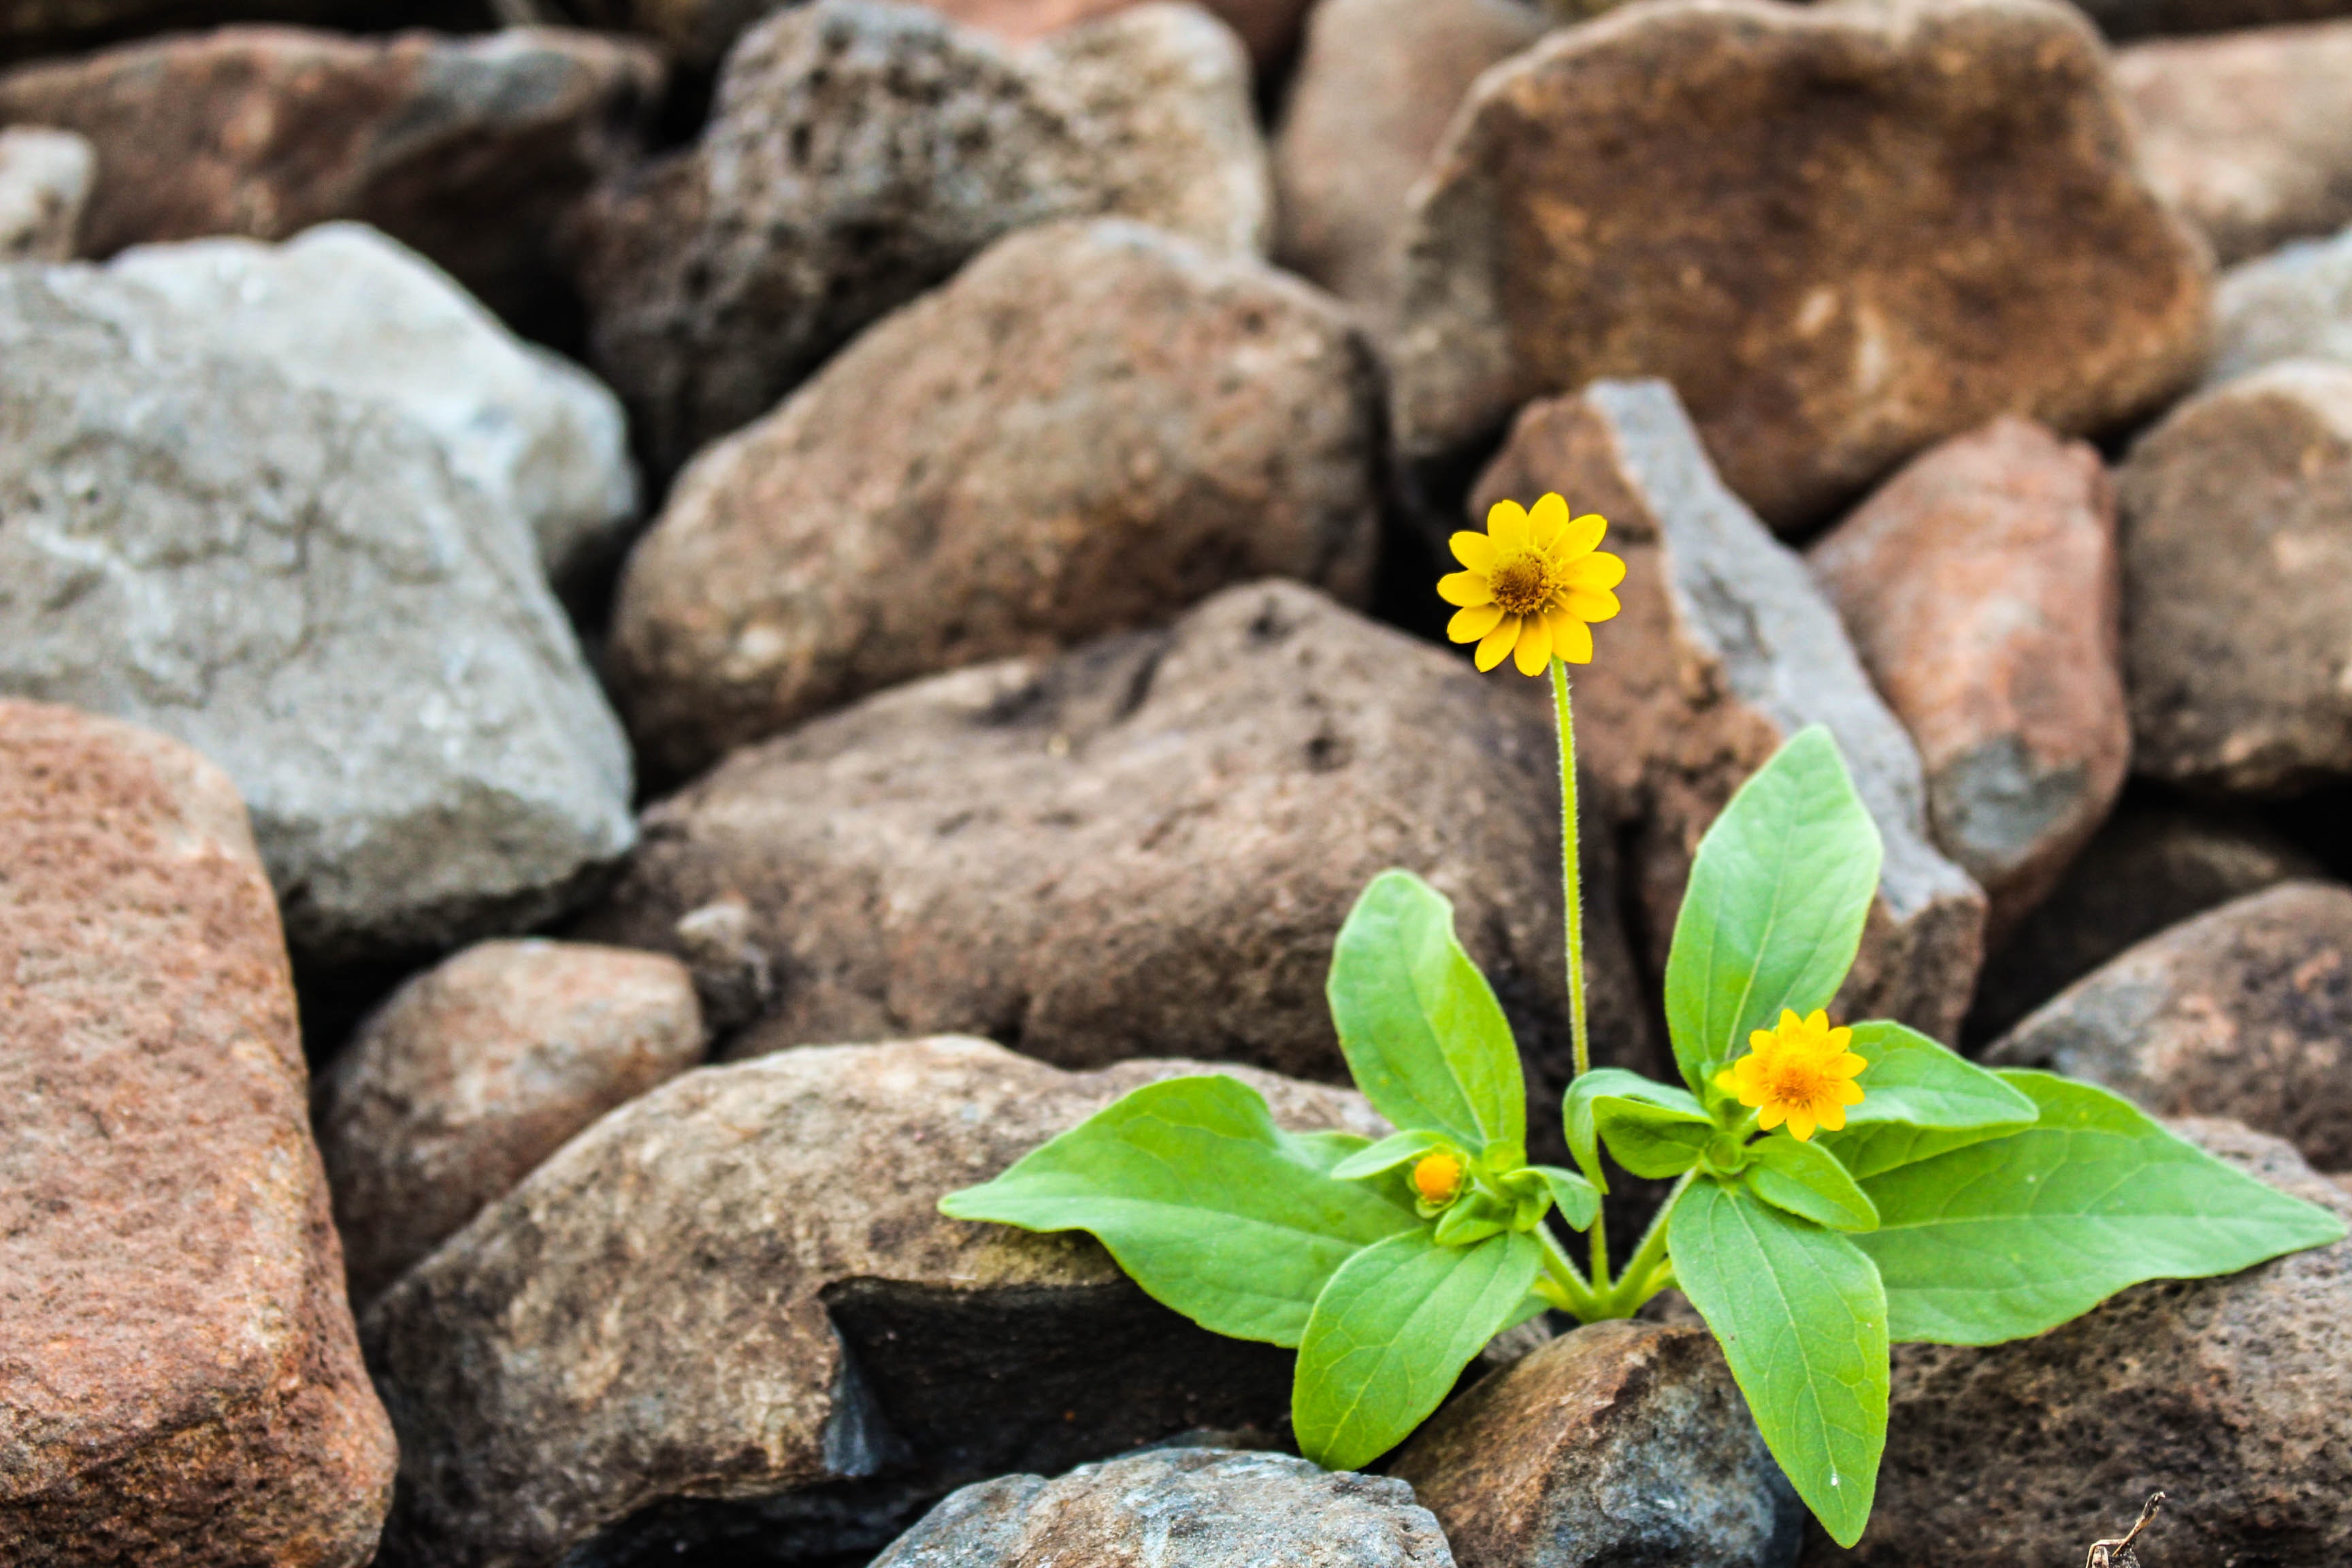 Small yellow flowers in a pile of rocks.